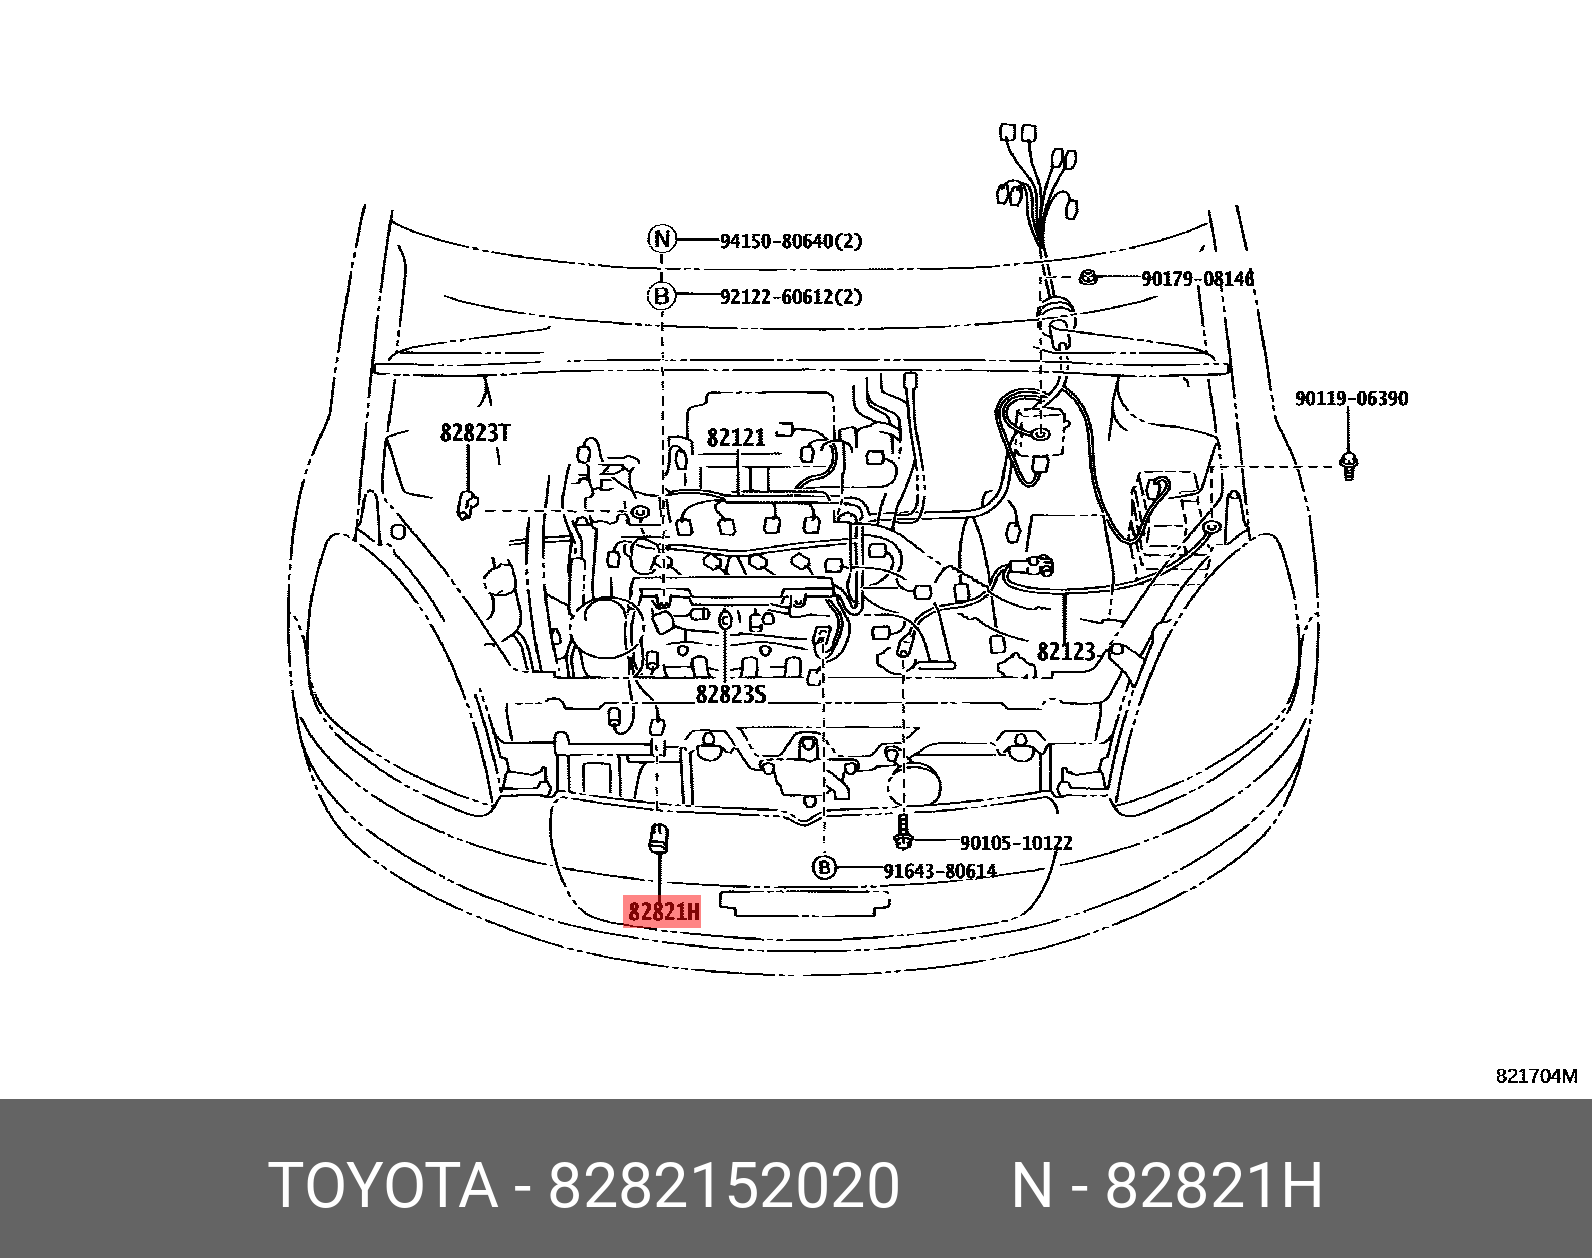 BB/ OPEN DECK 200001 - 200512, COVER, CONNECTOR